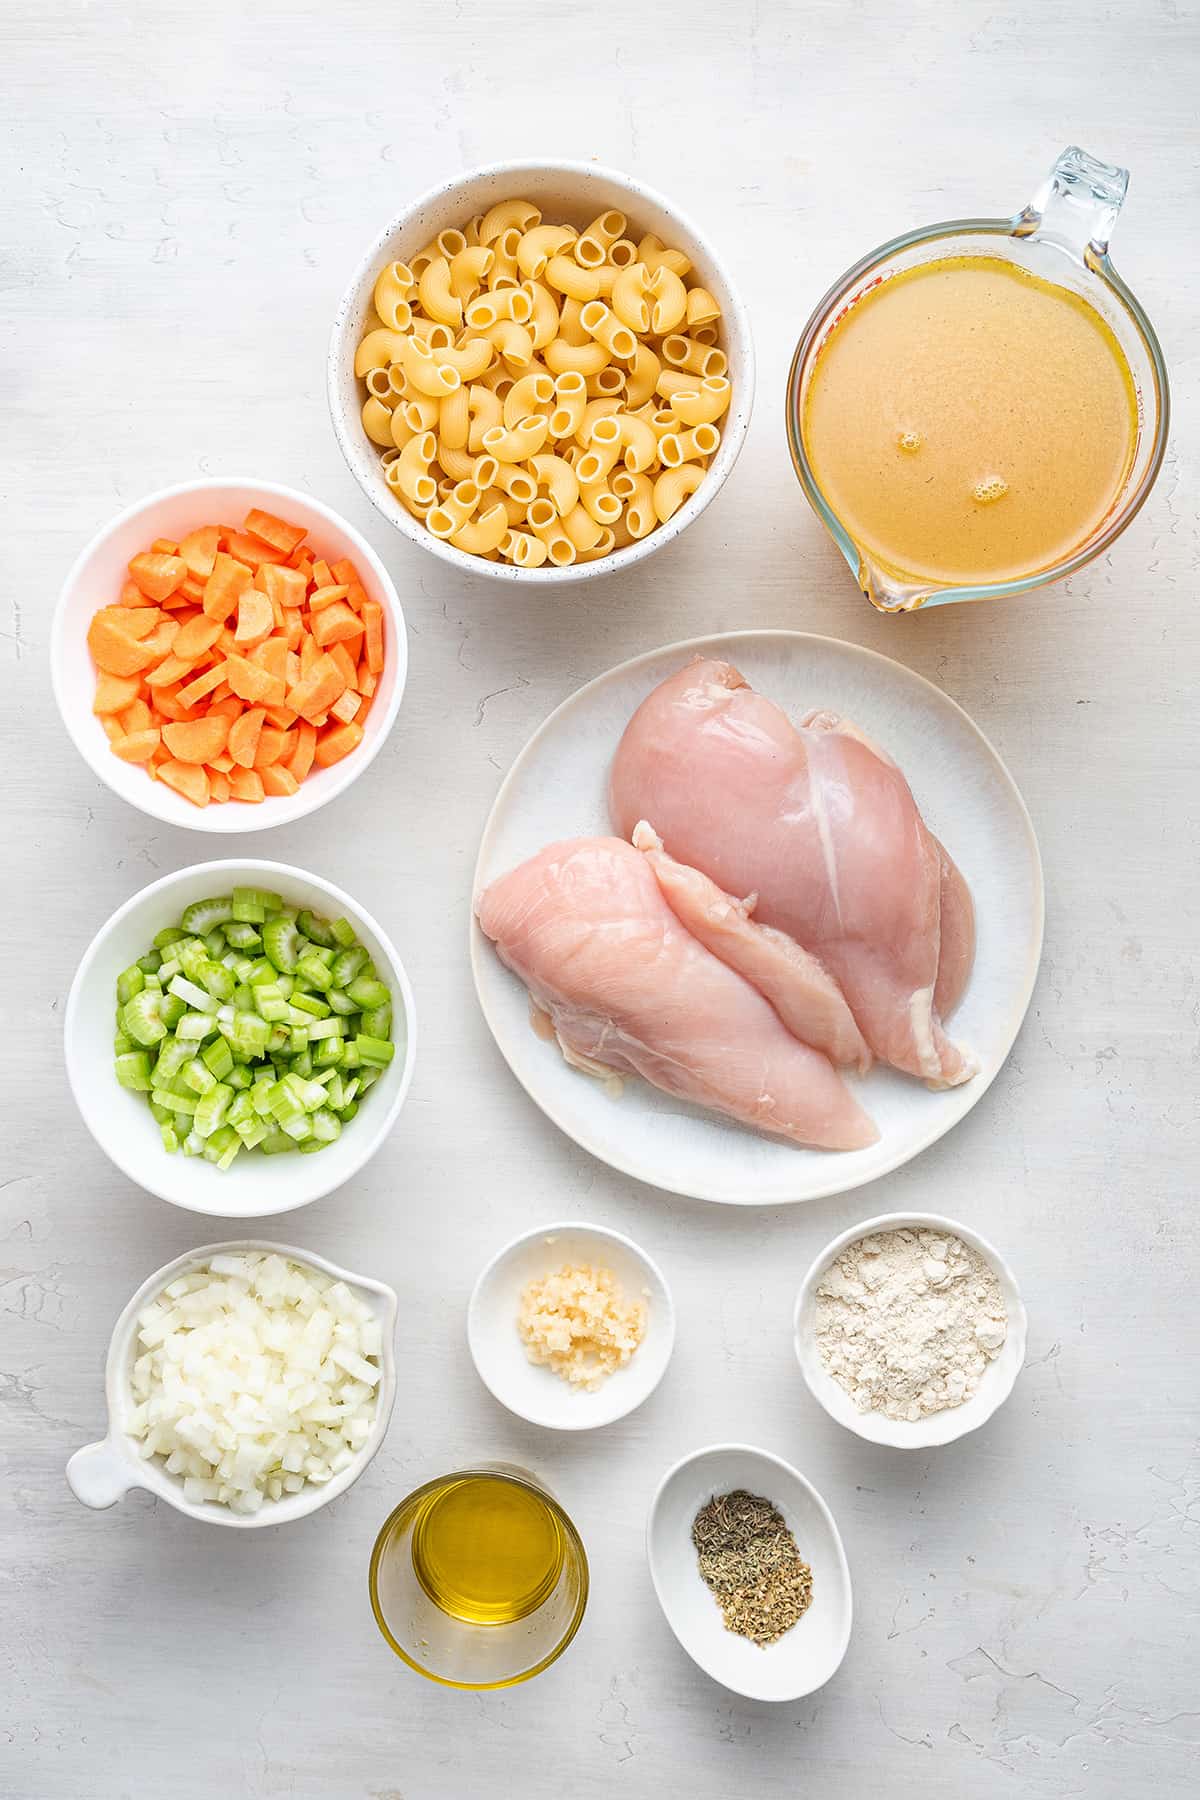 Overhead view of the ingredients needed for chicken noodle soup: chicken breasts, chicken broth, elbow macaroni, carrots, celery, onions, garlic, quinoa flour, spices, and oil